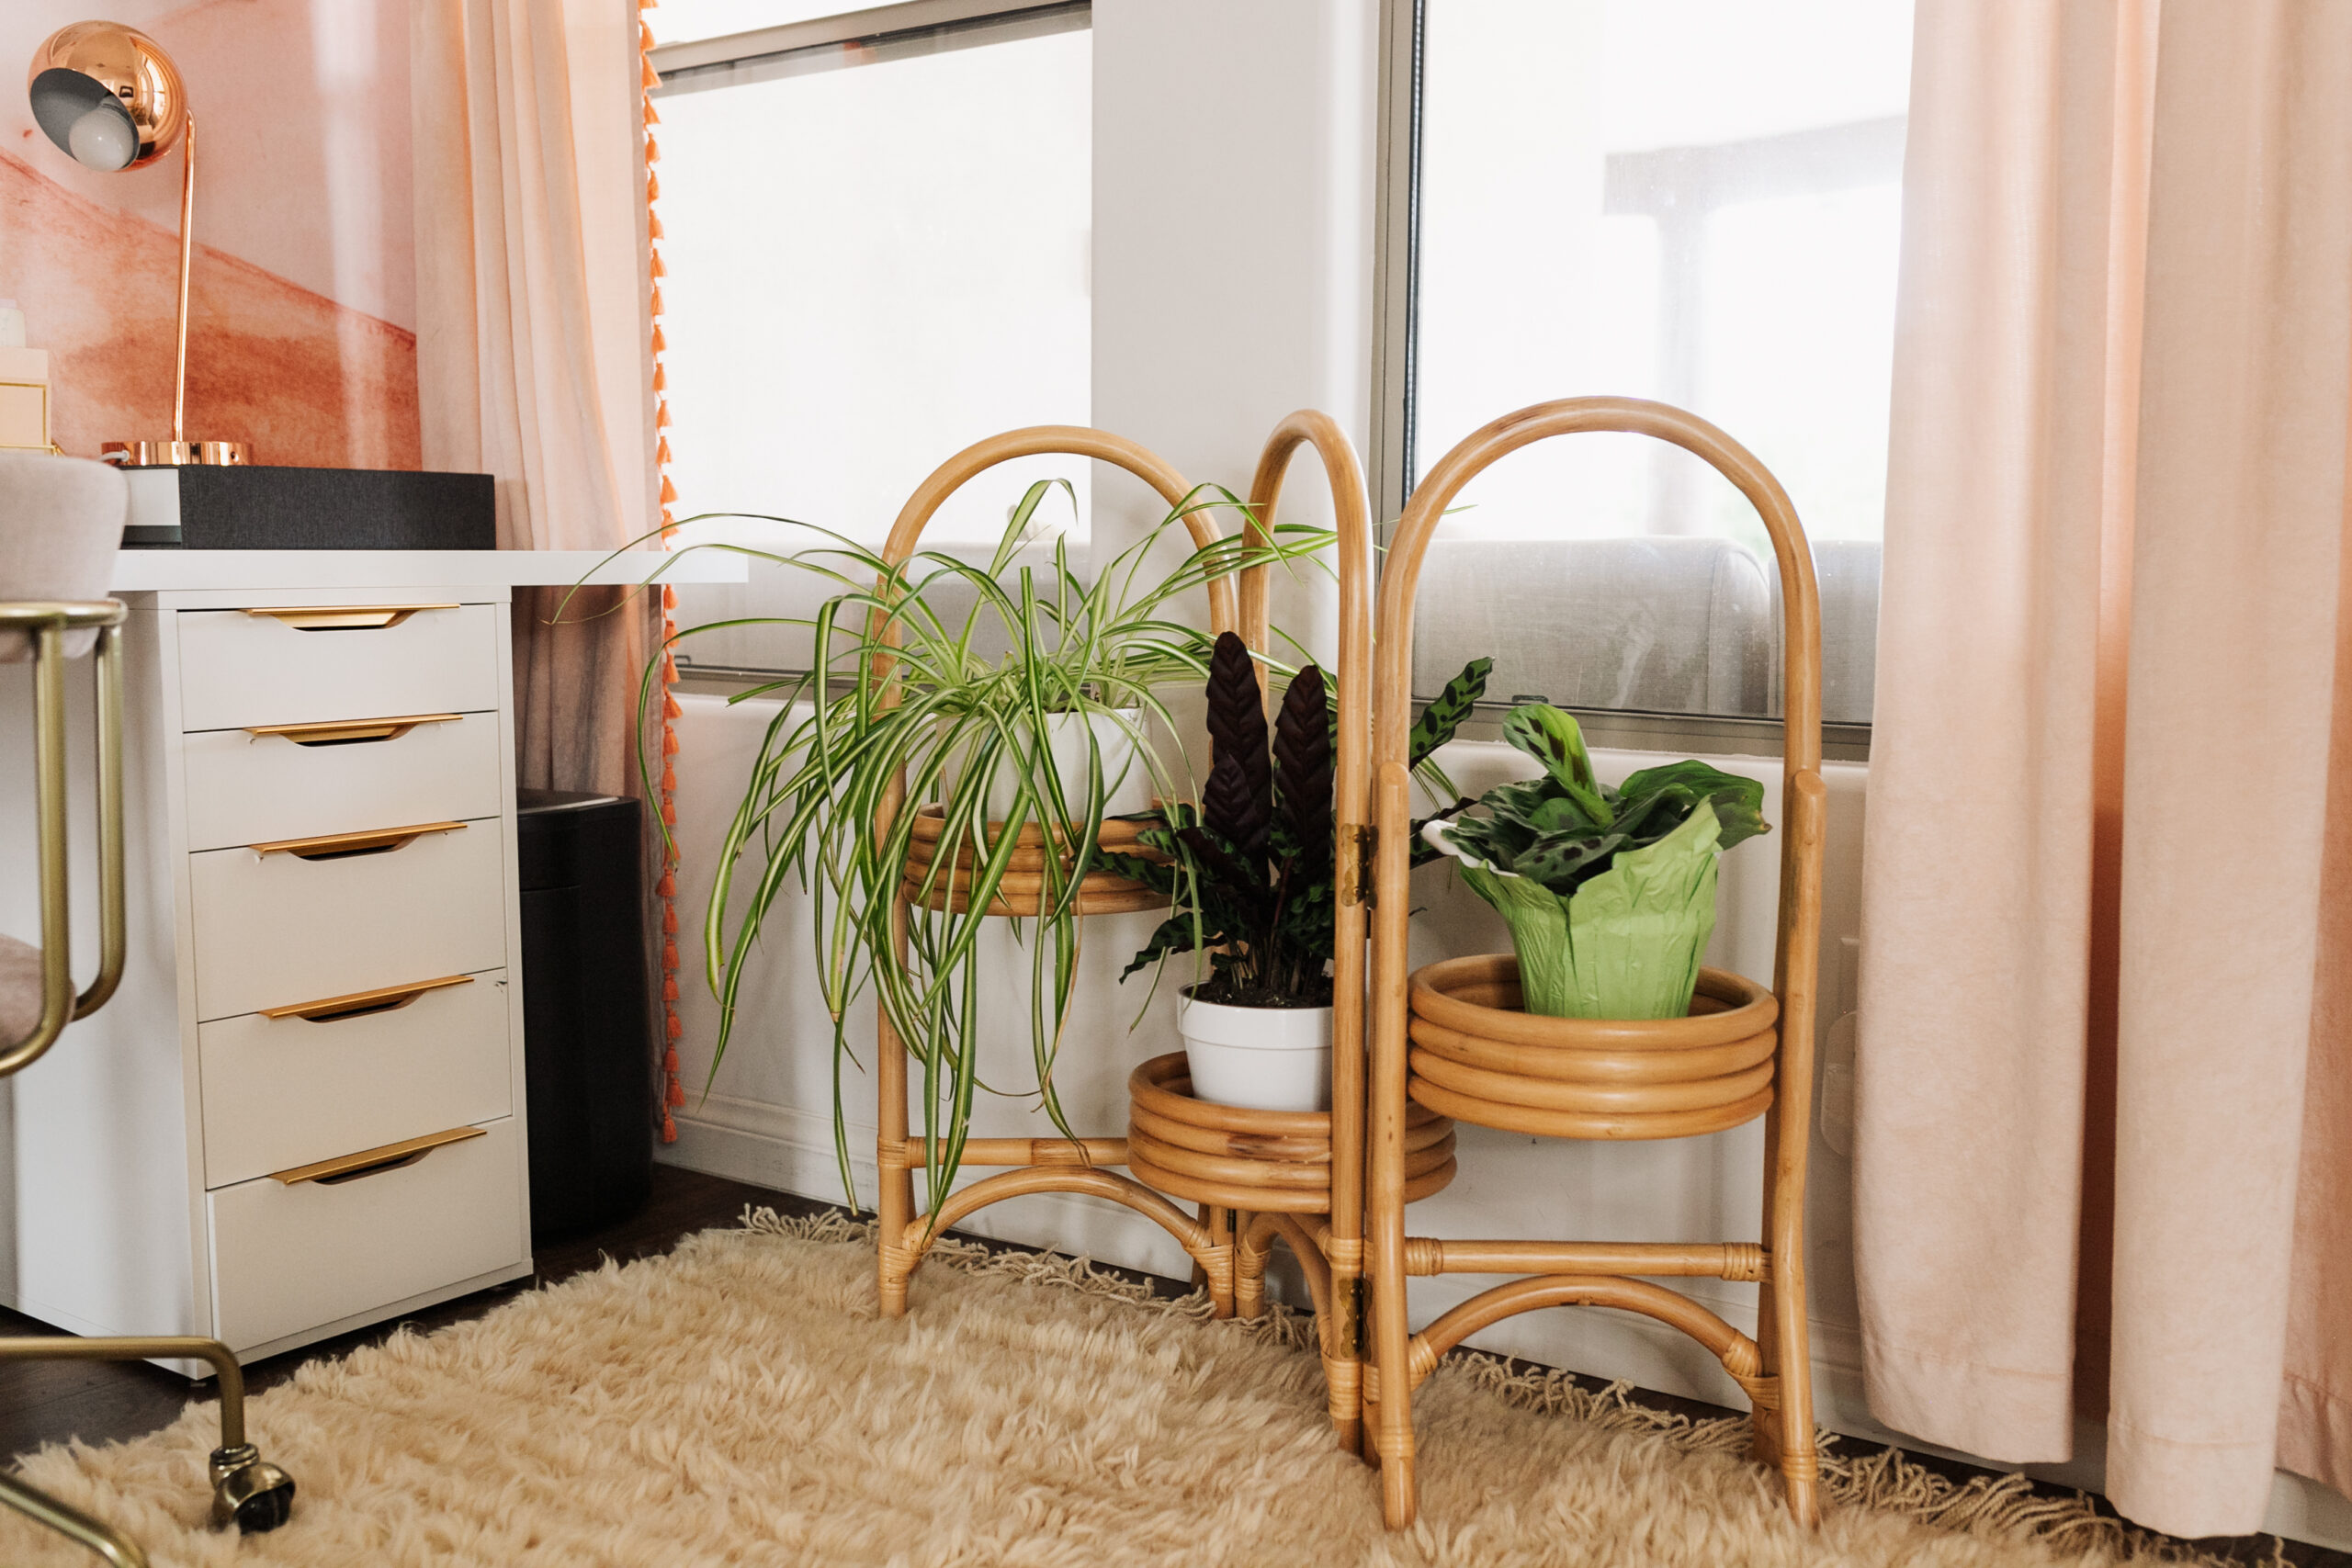 rattan plant stand in this feminine office update #feminineoffice #homeoffice #workfromhome